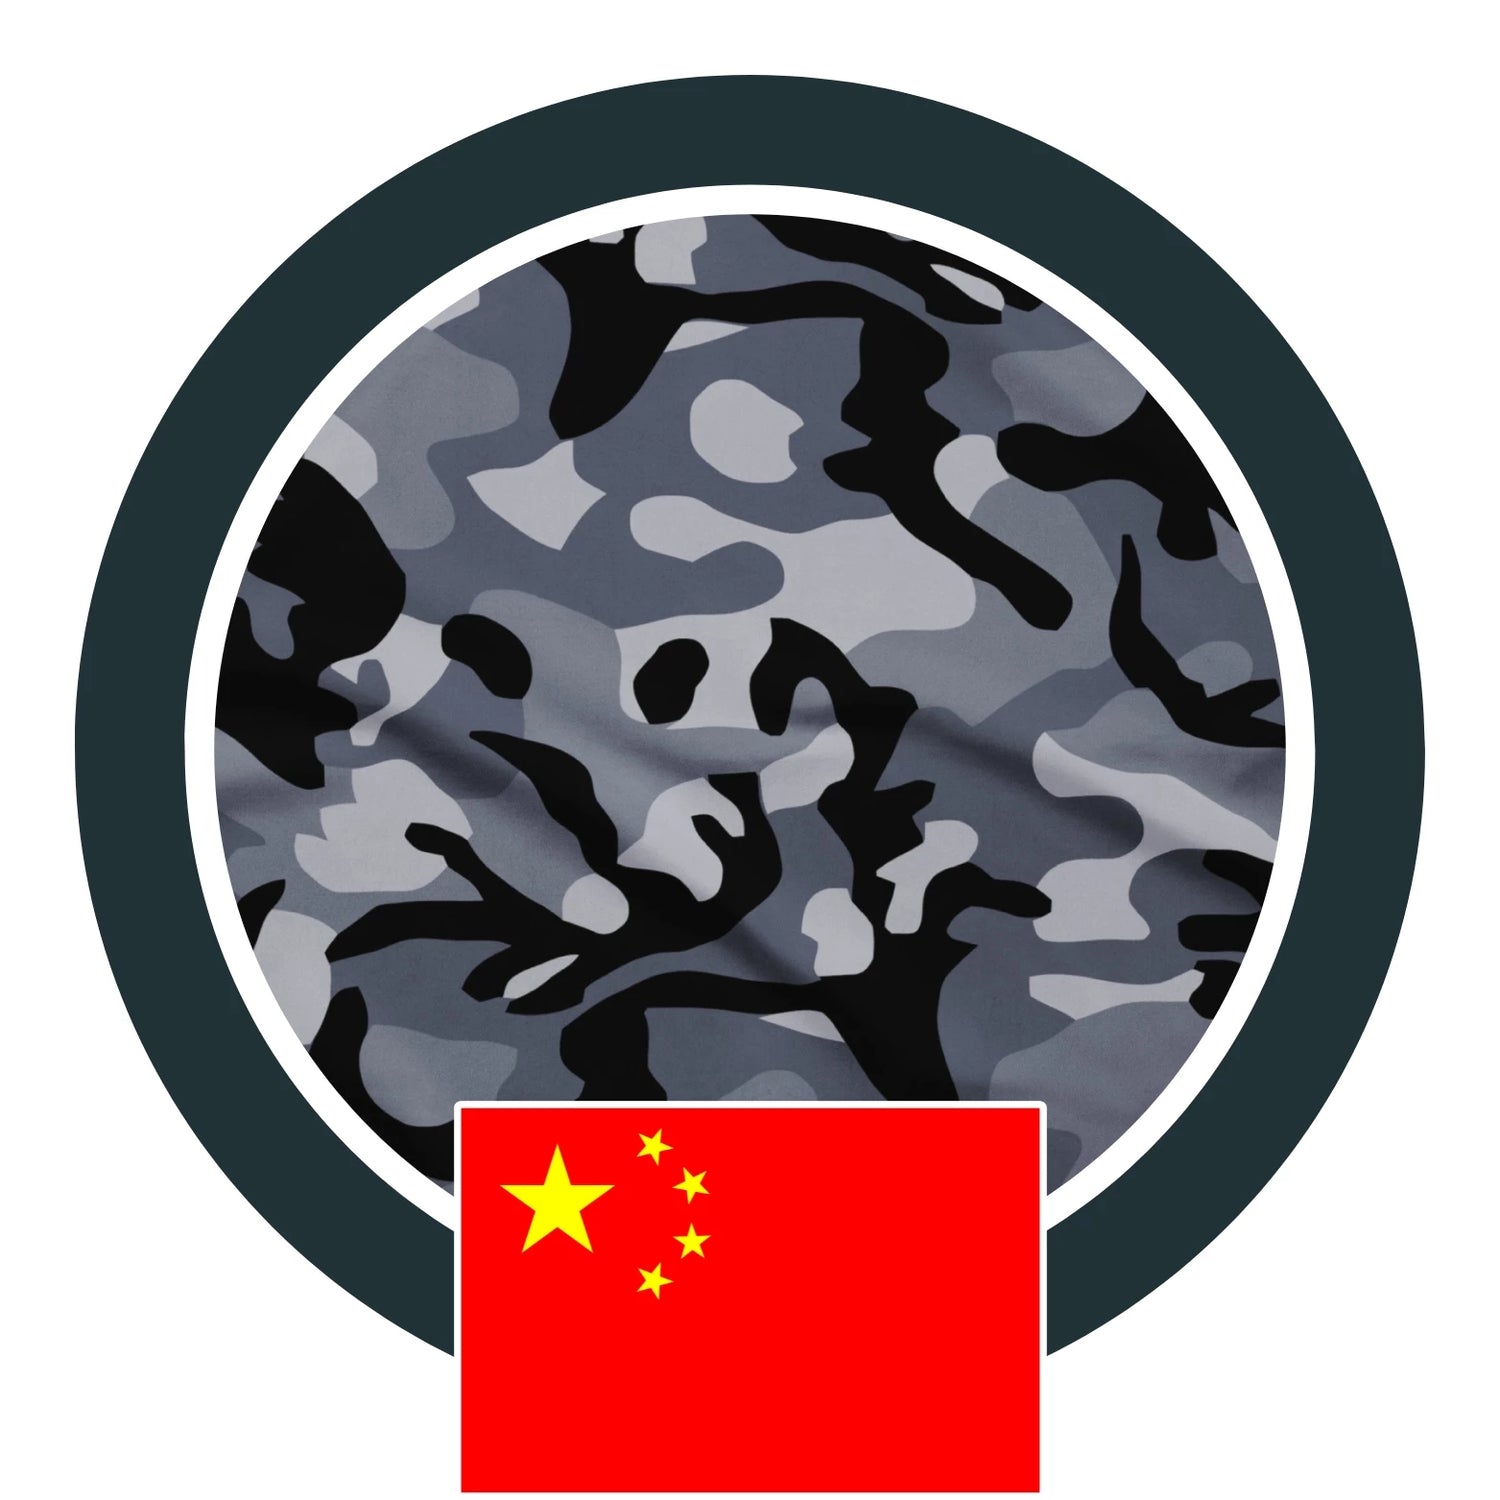 Why does the Chinese Army use a blue camouflage pattern that might